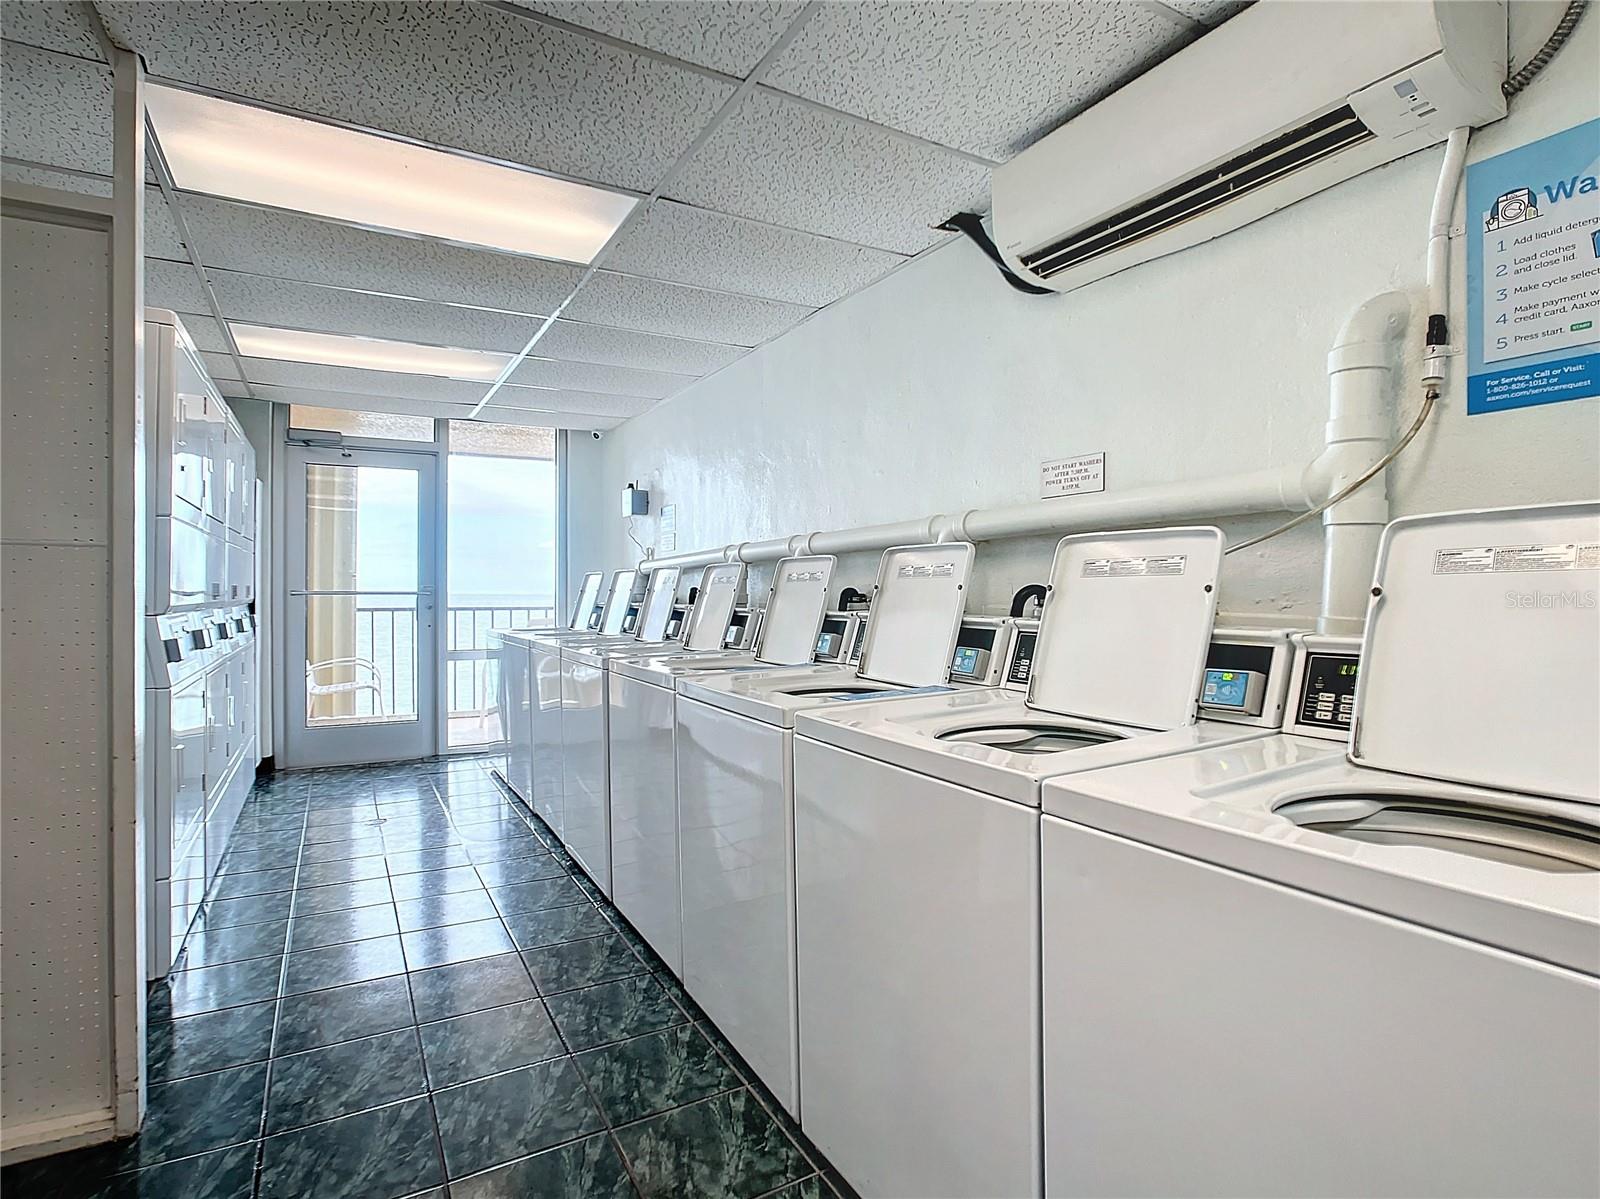 Laundry rooom with plenty of washers and dryers!